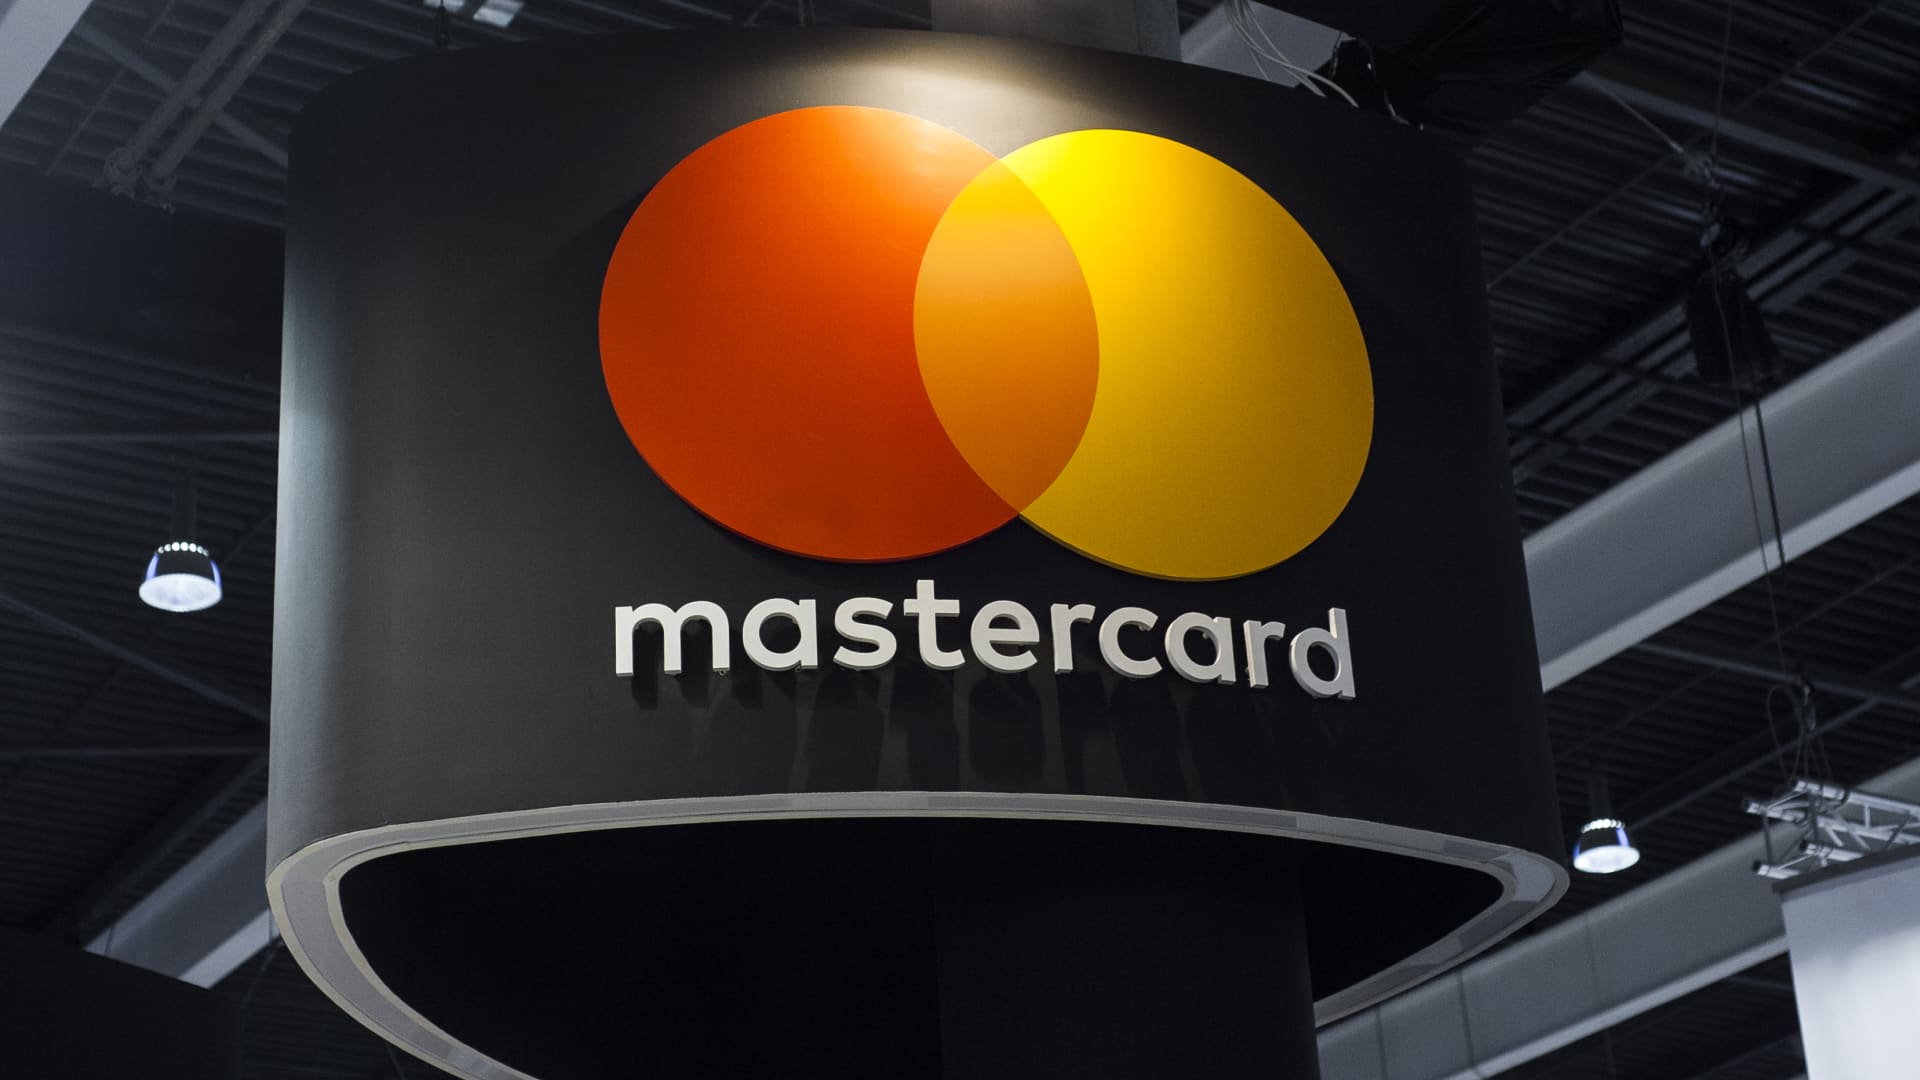 Mastercard says wide adoption of CBDCs would be ‘difficult’ right now